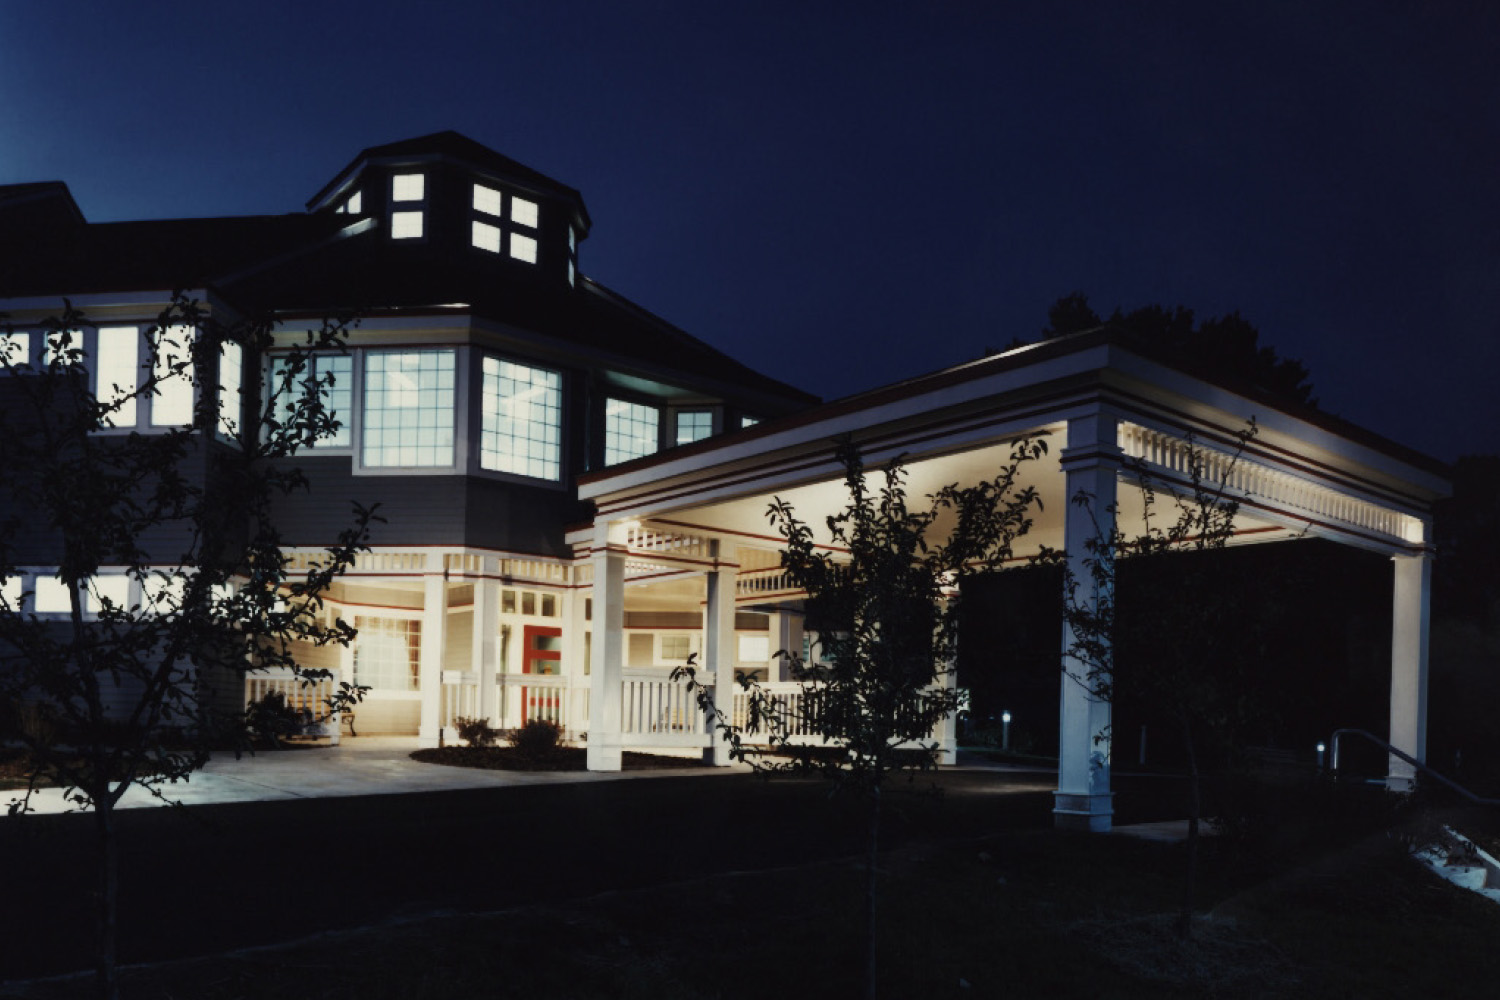 Entrance of Meadowbrook, seen at nighttime